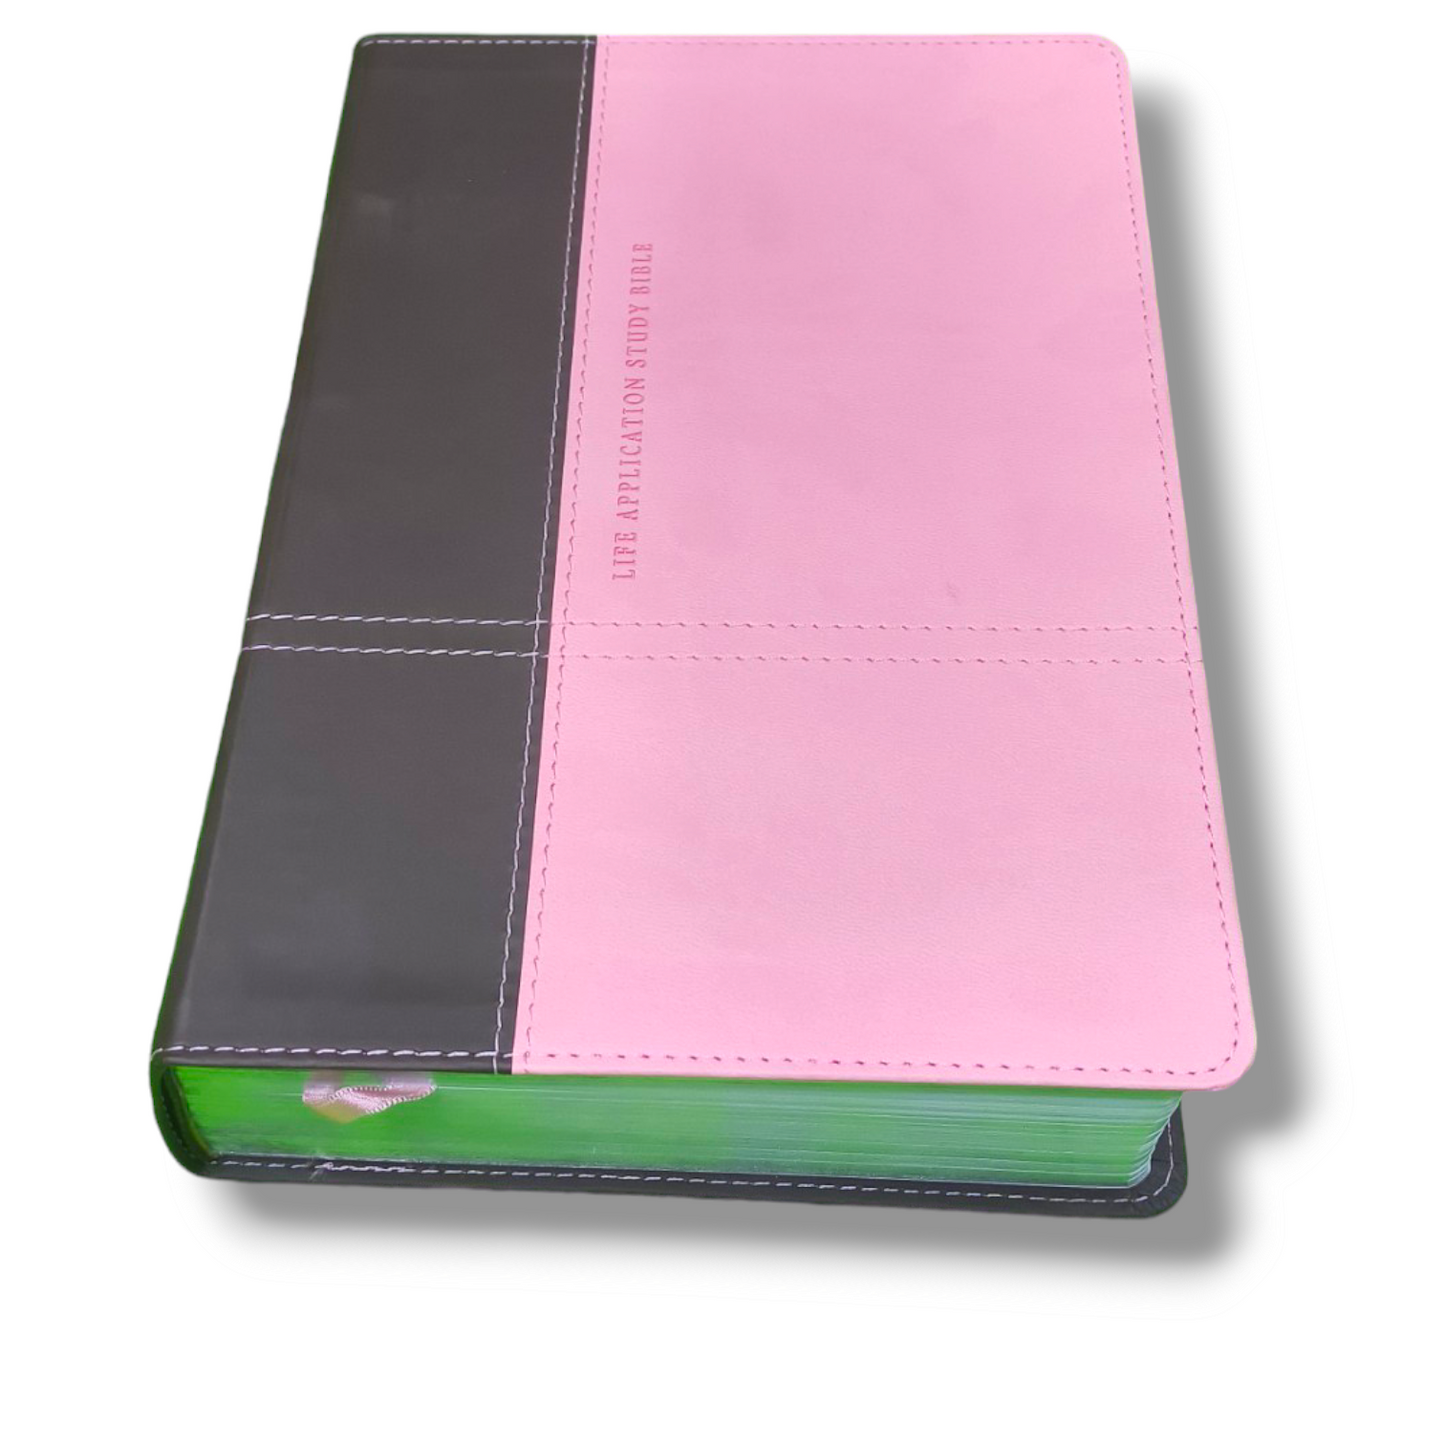 NLT Life Application Study Bible | Attractive Dark Brown/Pink Leather Edition | With Thumb Edition | New Edition